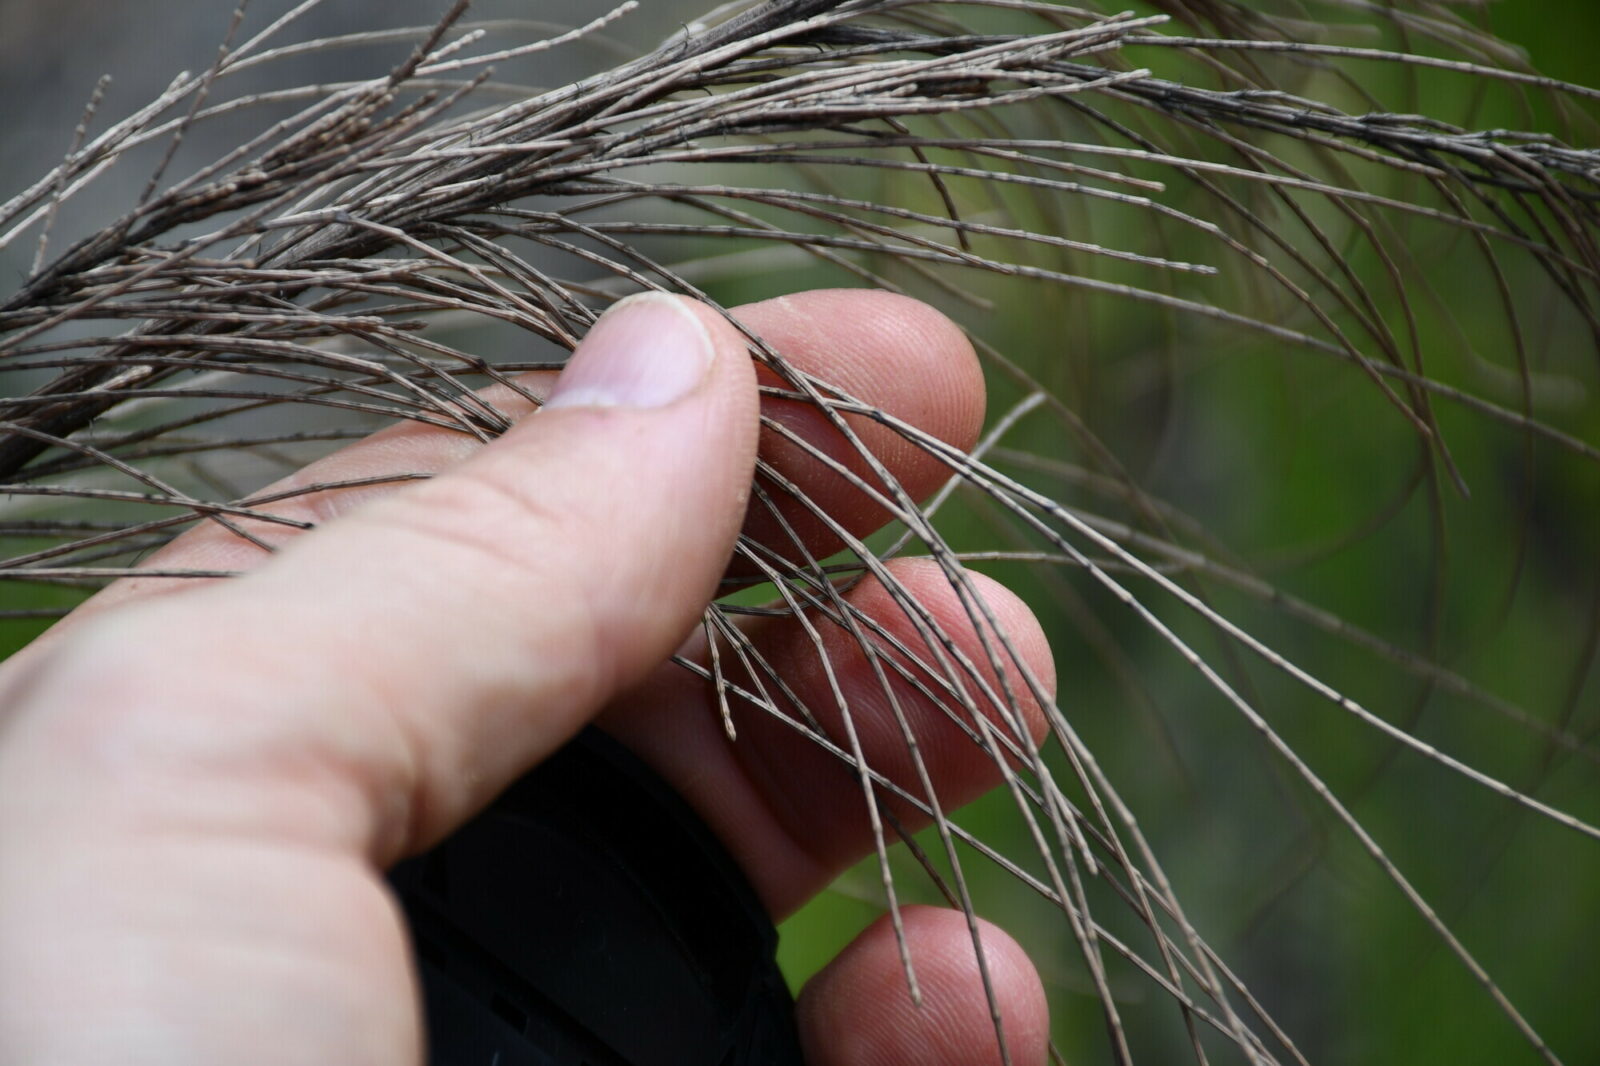 Branchlets of Casuarina, the "Australian pine" (which in reality is not a pine, but a peculiar flowering plant). We found many dry branchlets of Casuarina, cut according to their naturally segmented structure, inside the mounds of Nasutitermes magnus. Photo Andrea Perna [CC BY-SA 3.0]